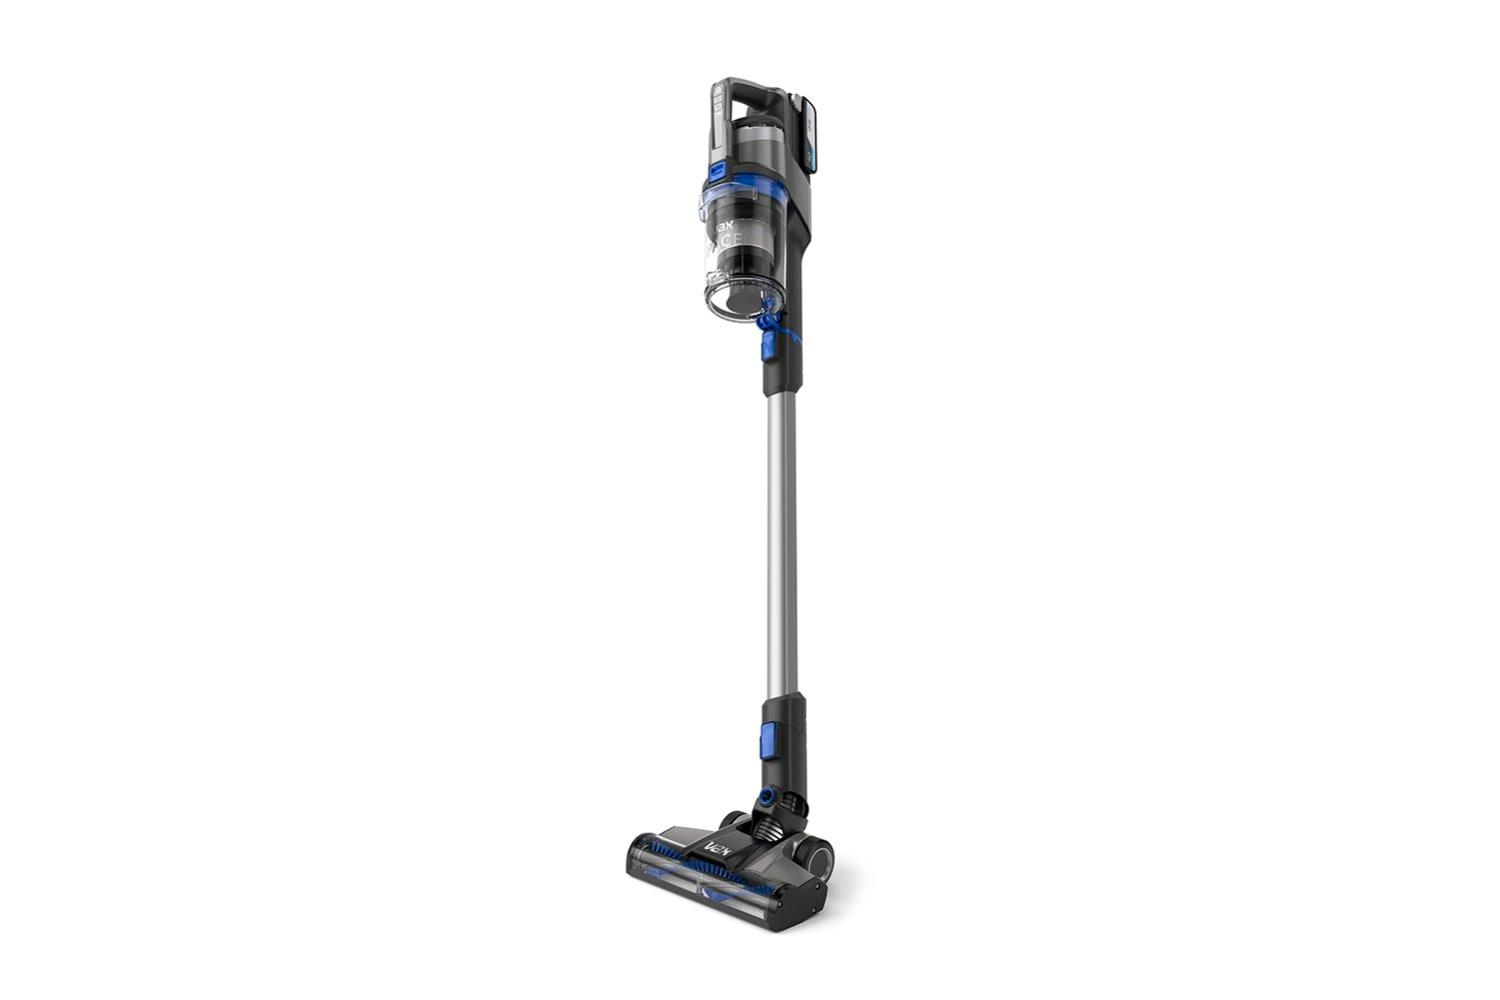 Vax Pace Cordless Vaccum Cleaner